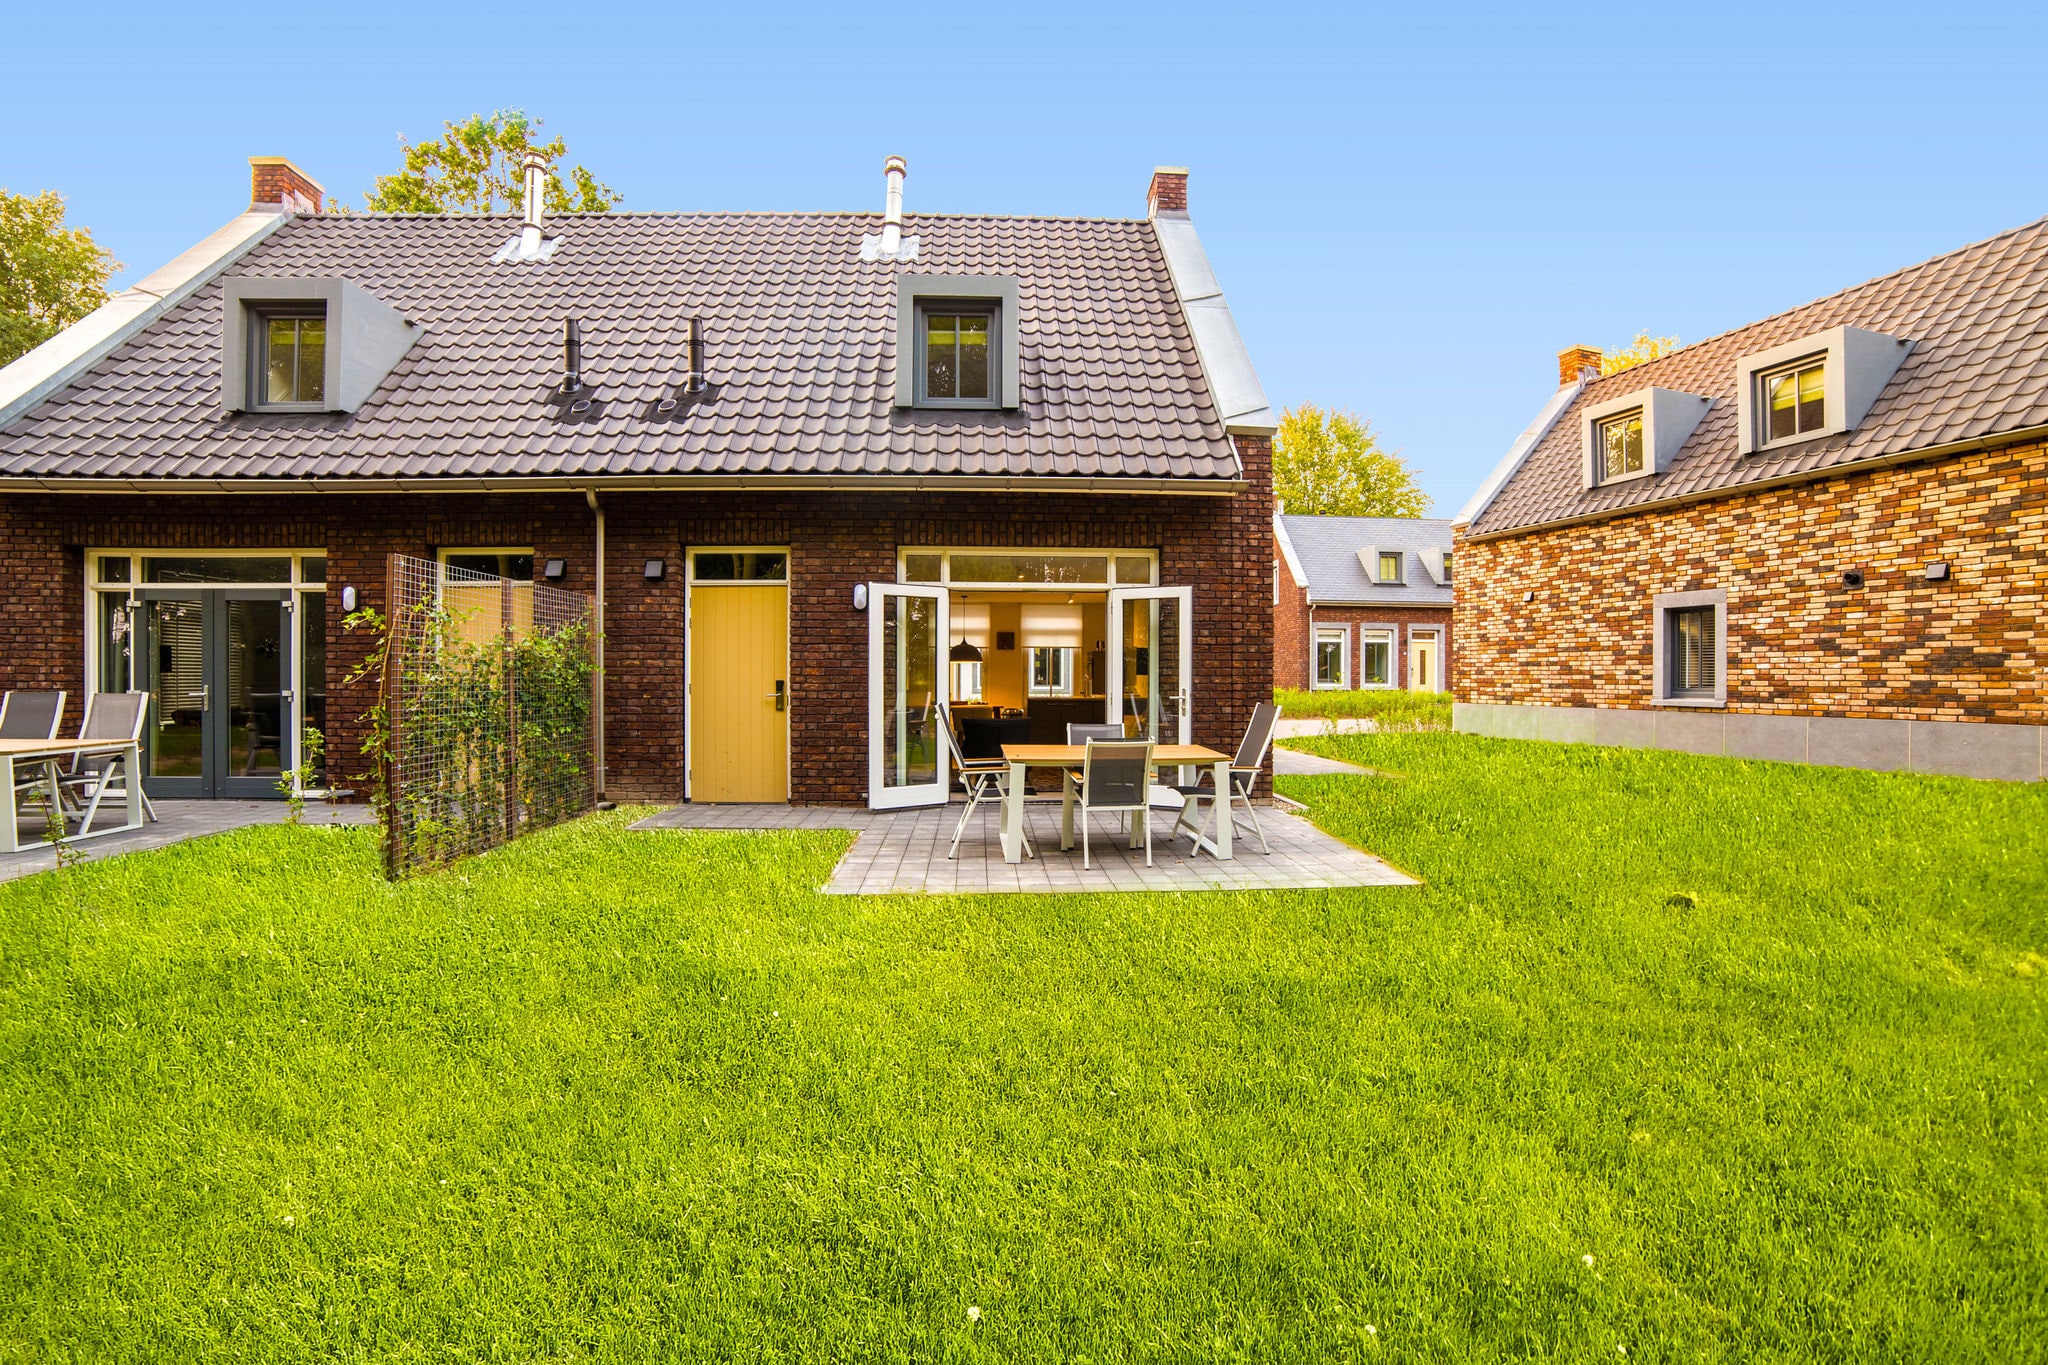 Villa with dishwasher, 4 km. from Maastricht